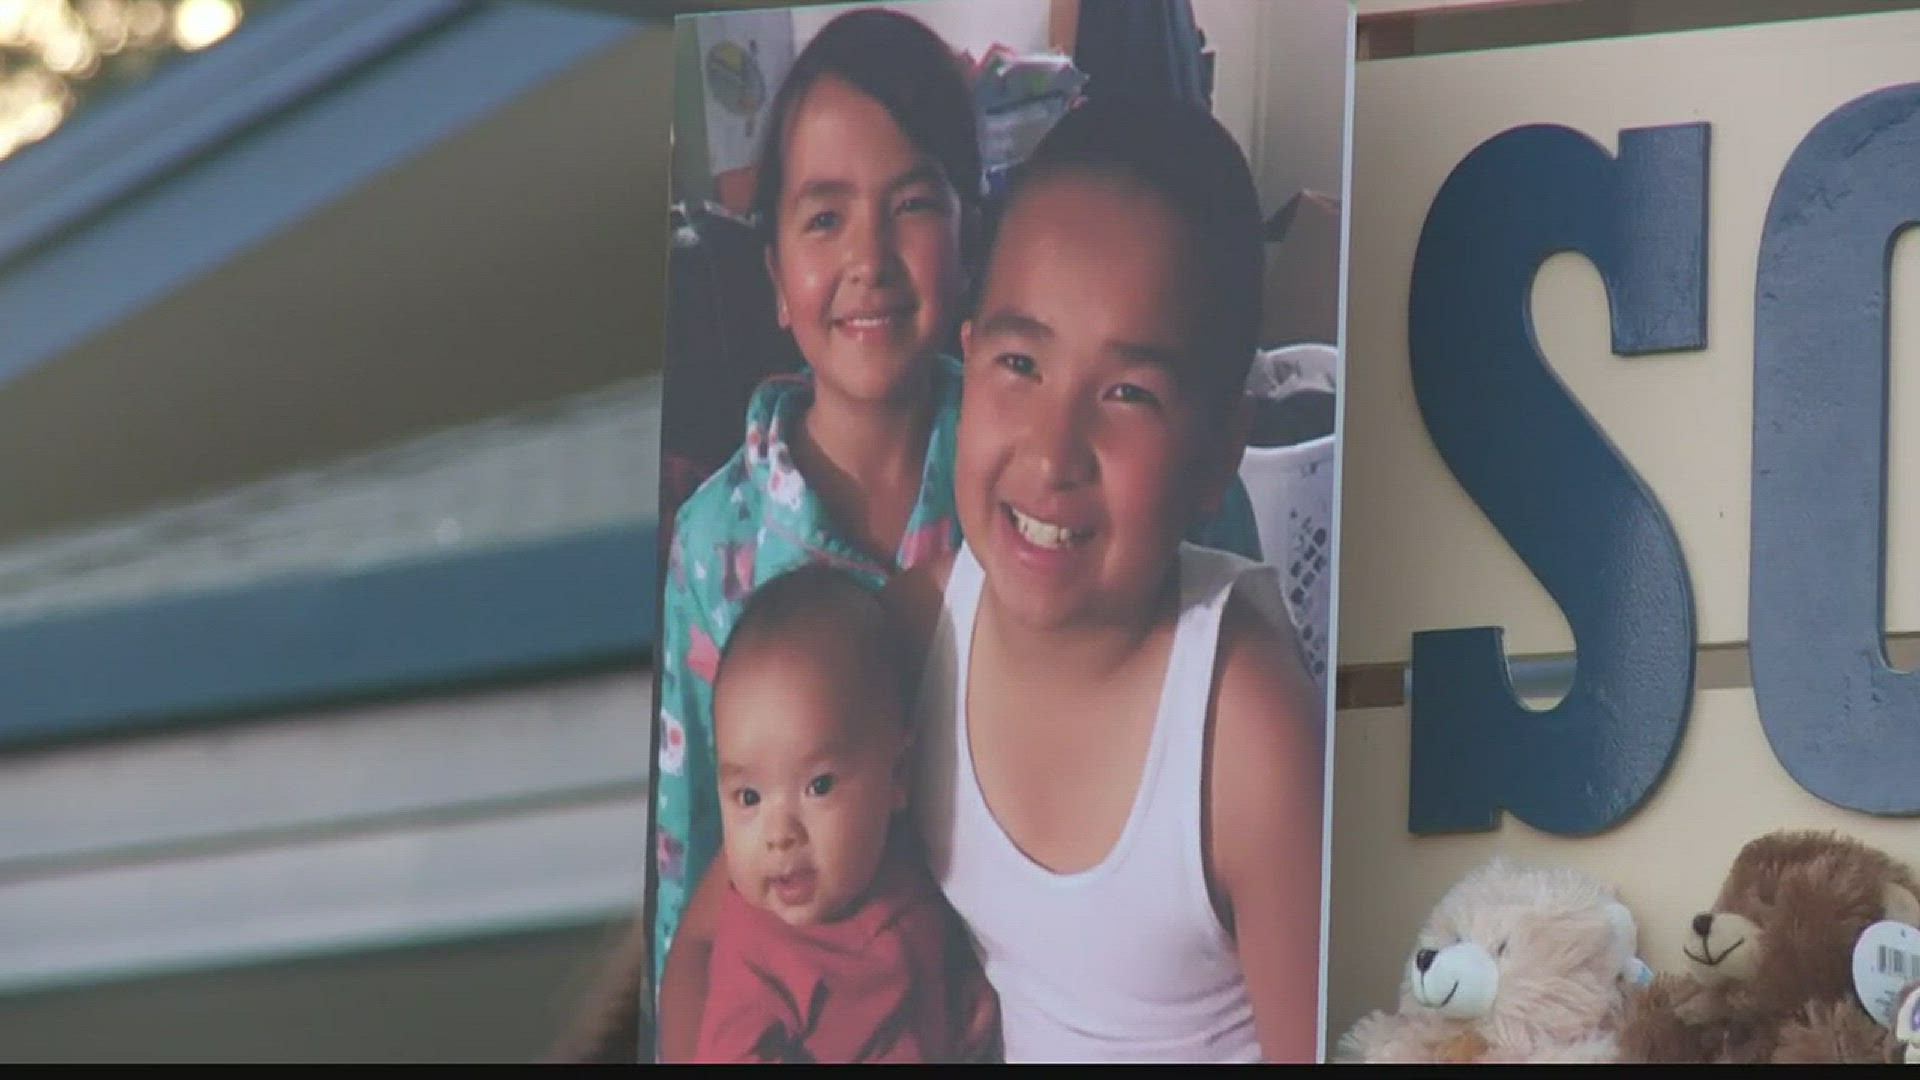 The community of West Sacramento is in mourning after three children were found dead in an apartment complex Wednesday night.